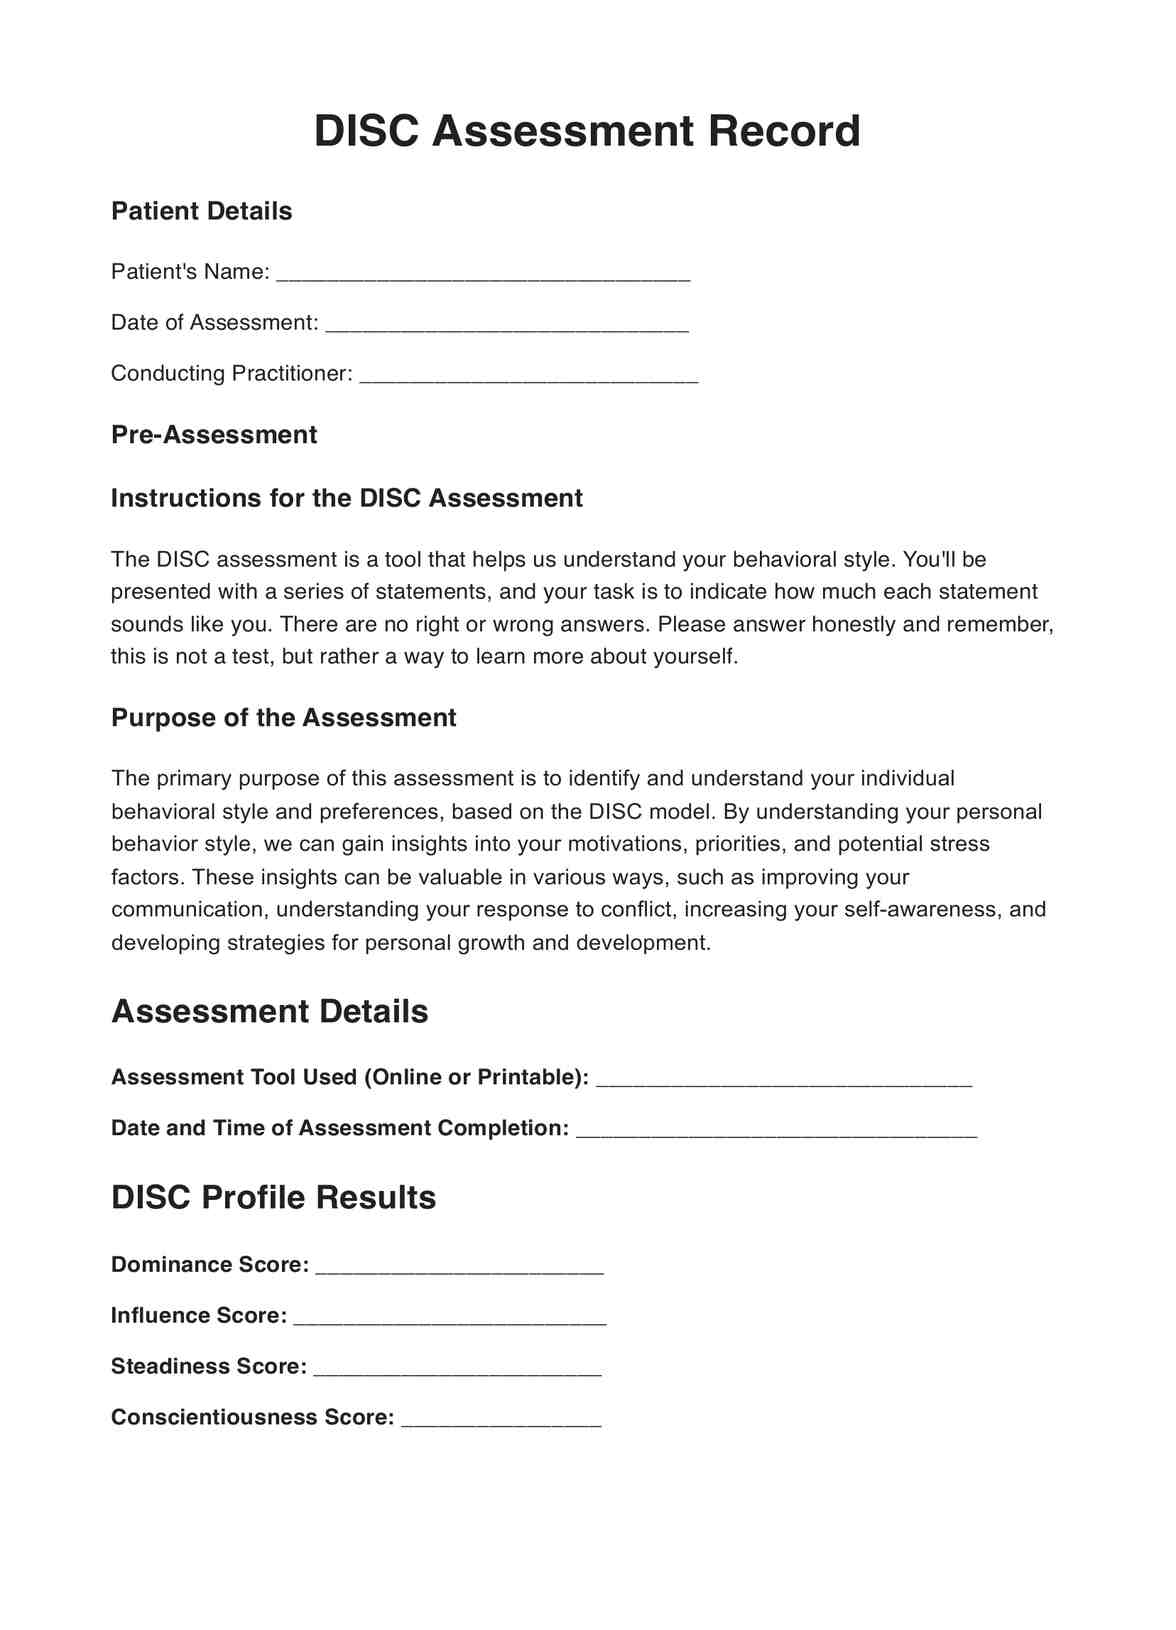 DISC Assessment PDF Example